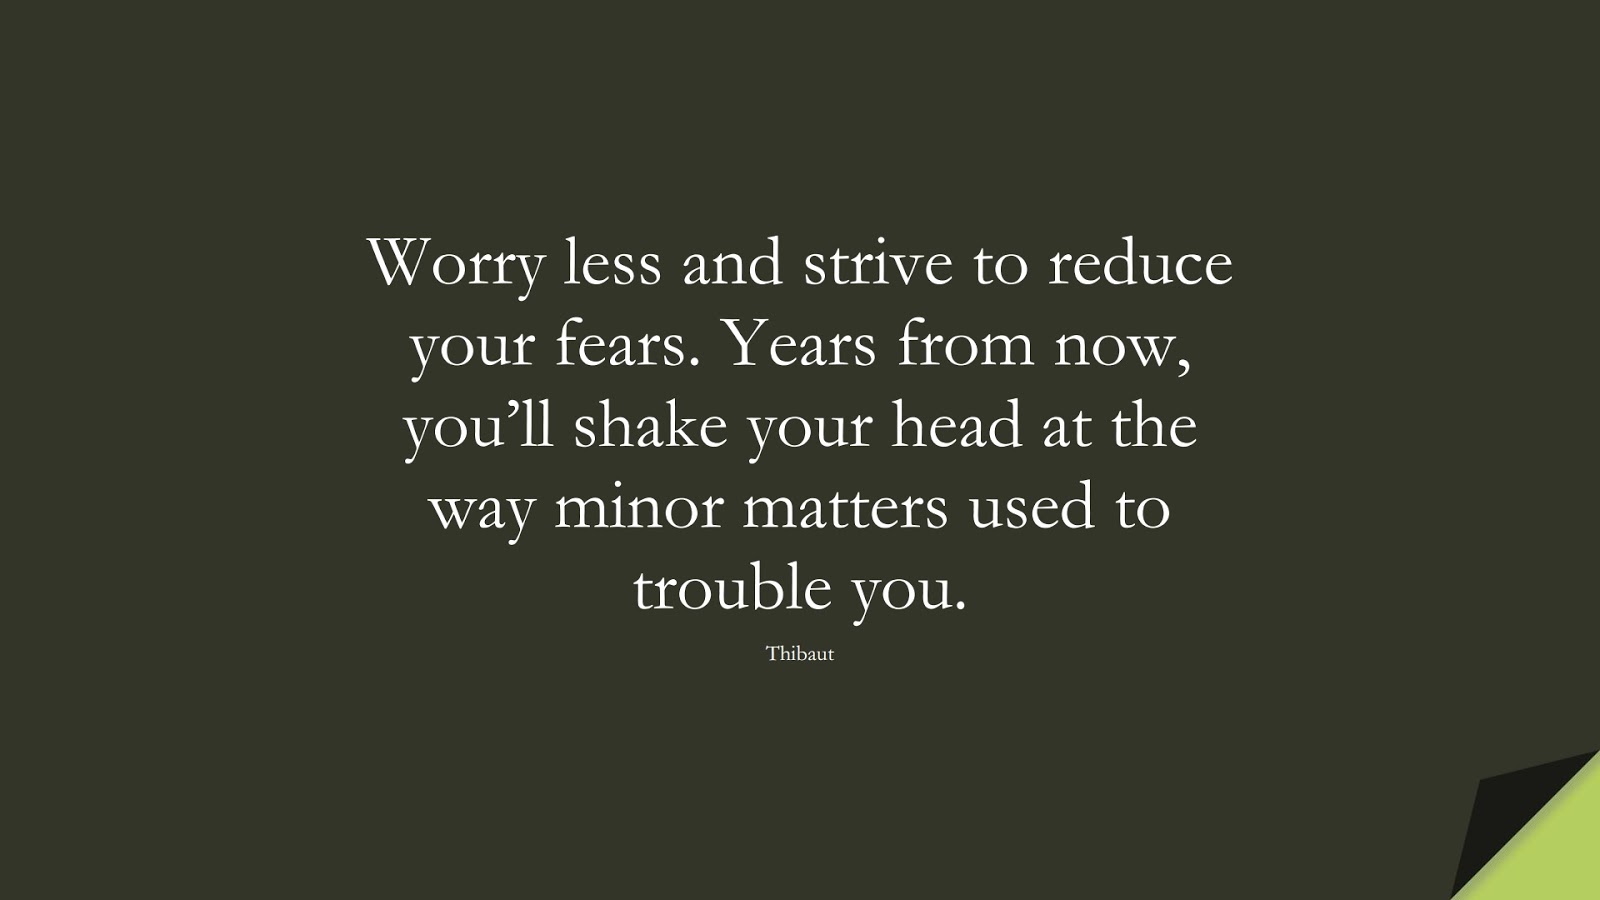 Worry less and strive to reduce your fears. Years from now, you’ll shake your head at the way minor matters used to trouble you. (Thibaut);  #AnxietyQuotes